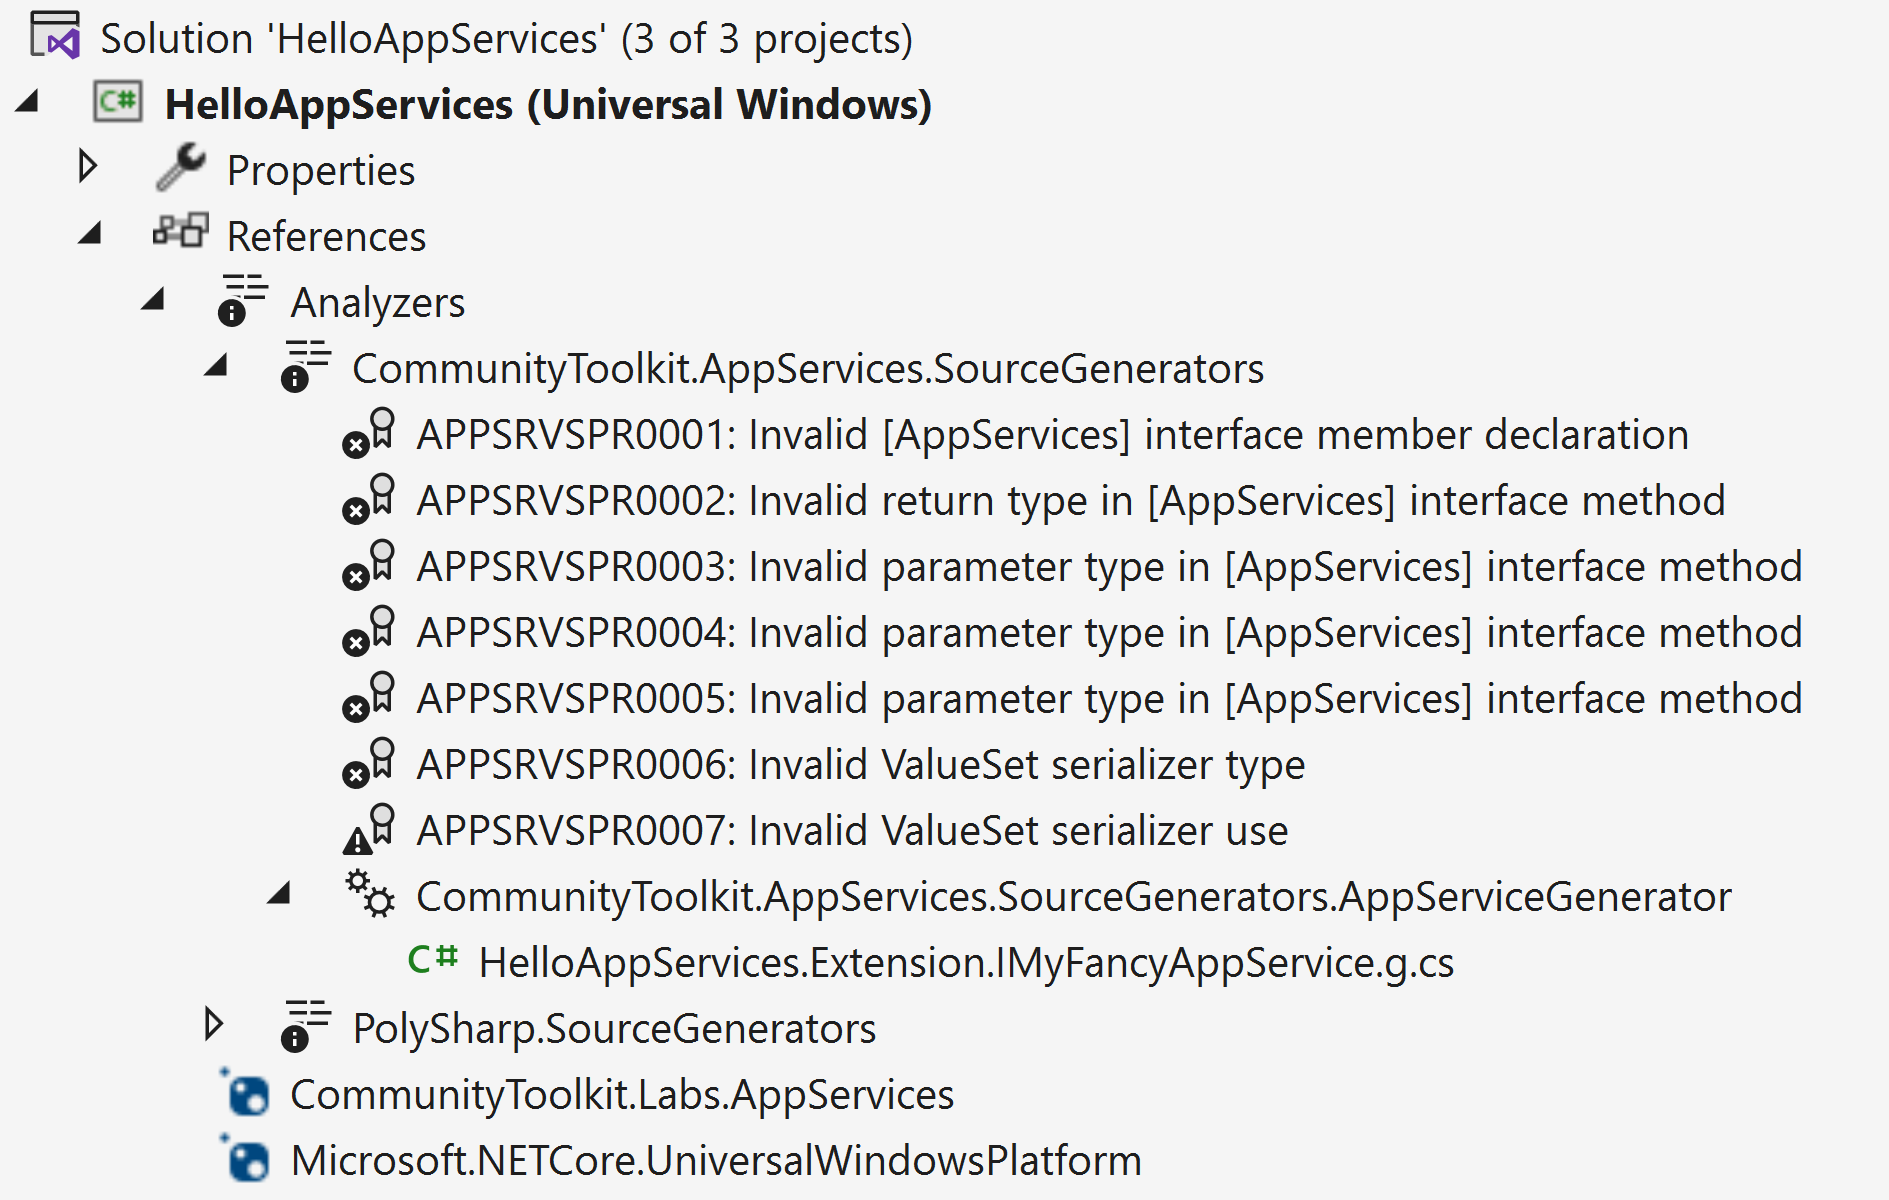 The "References > Analyzers" node in Solution Explorer in Visual Studio, listing all analyzers bundled in the AppServices library, along with the generator too (which also generated a file). The analyzers show the various diagnostics that can be produced, like when using invalid parameters or incorrectly using complex types without a custom serializer in an app service interface.